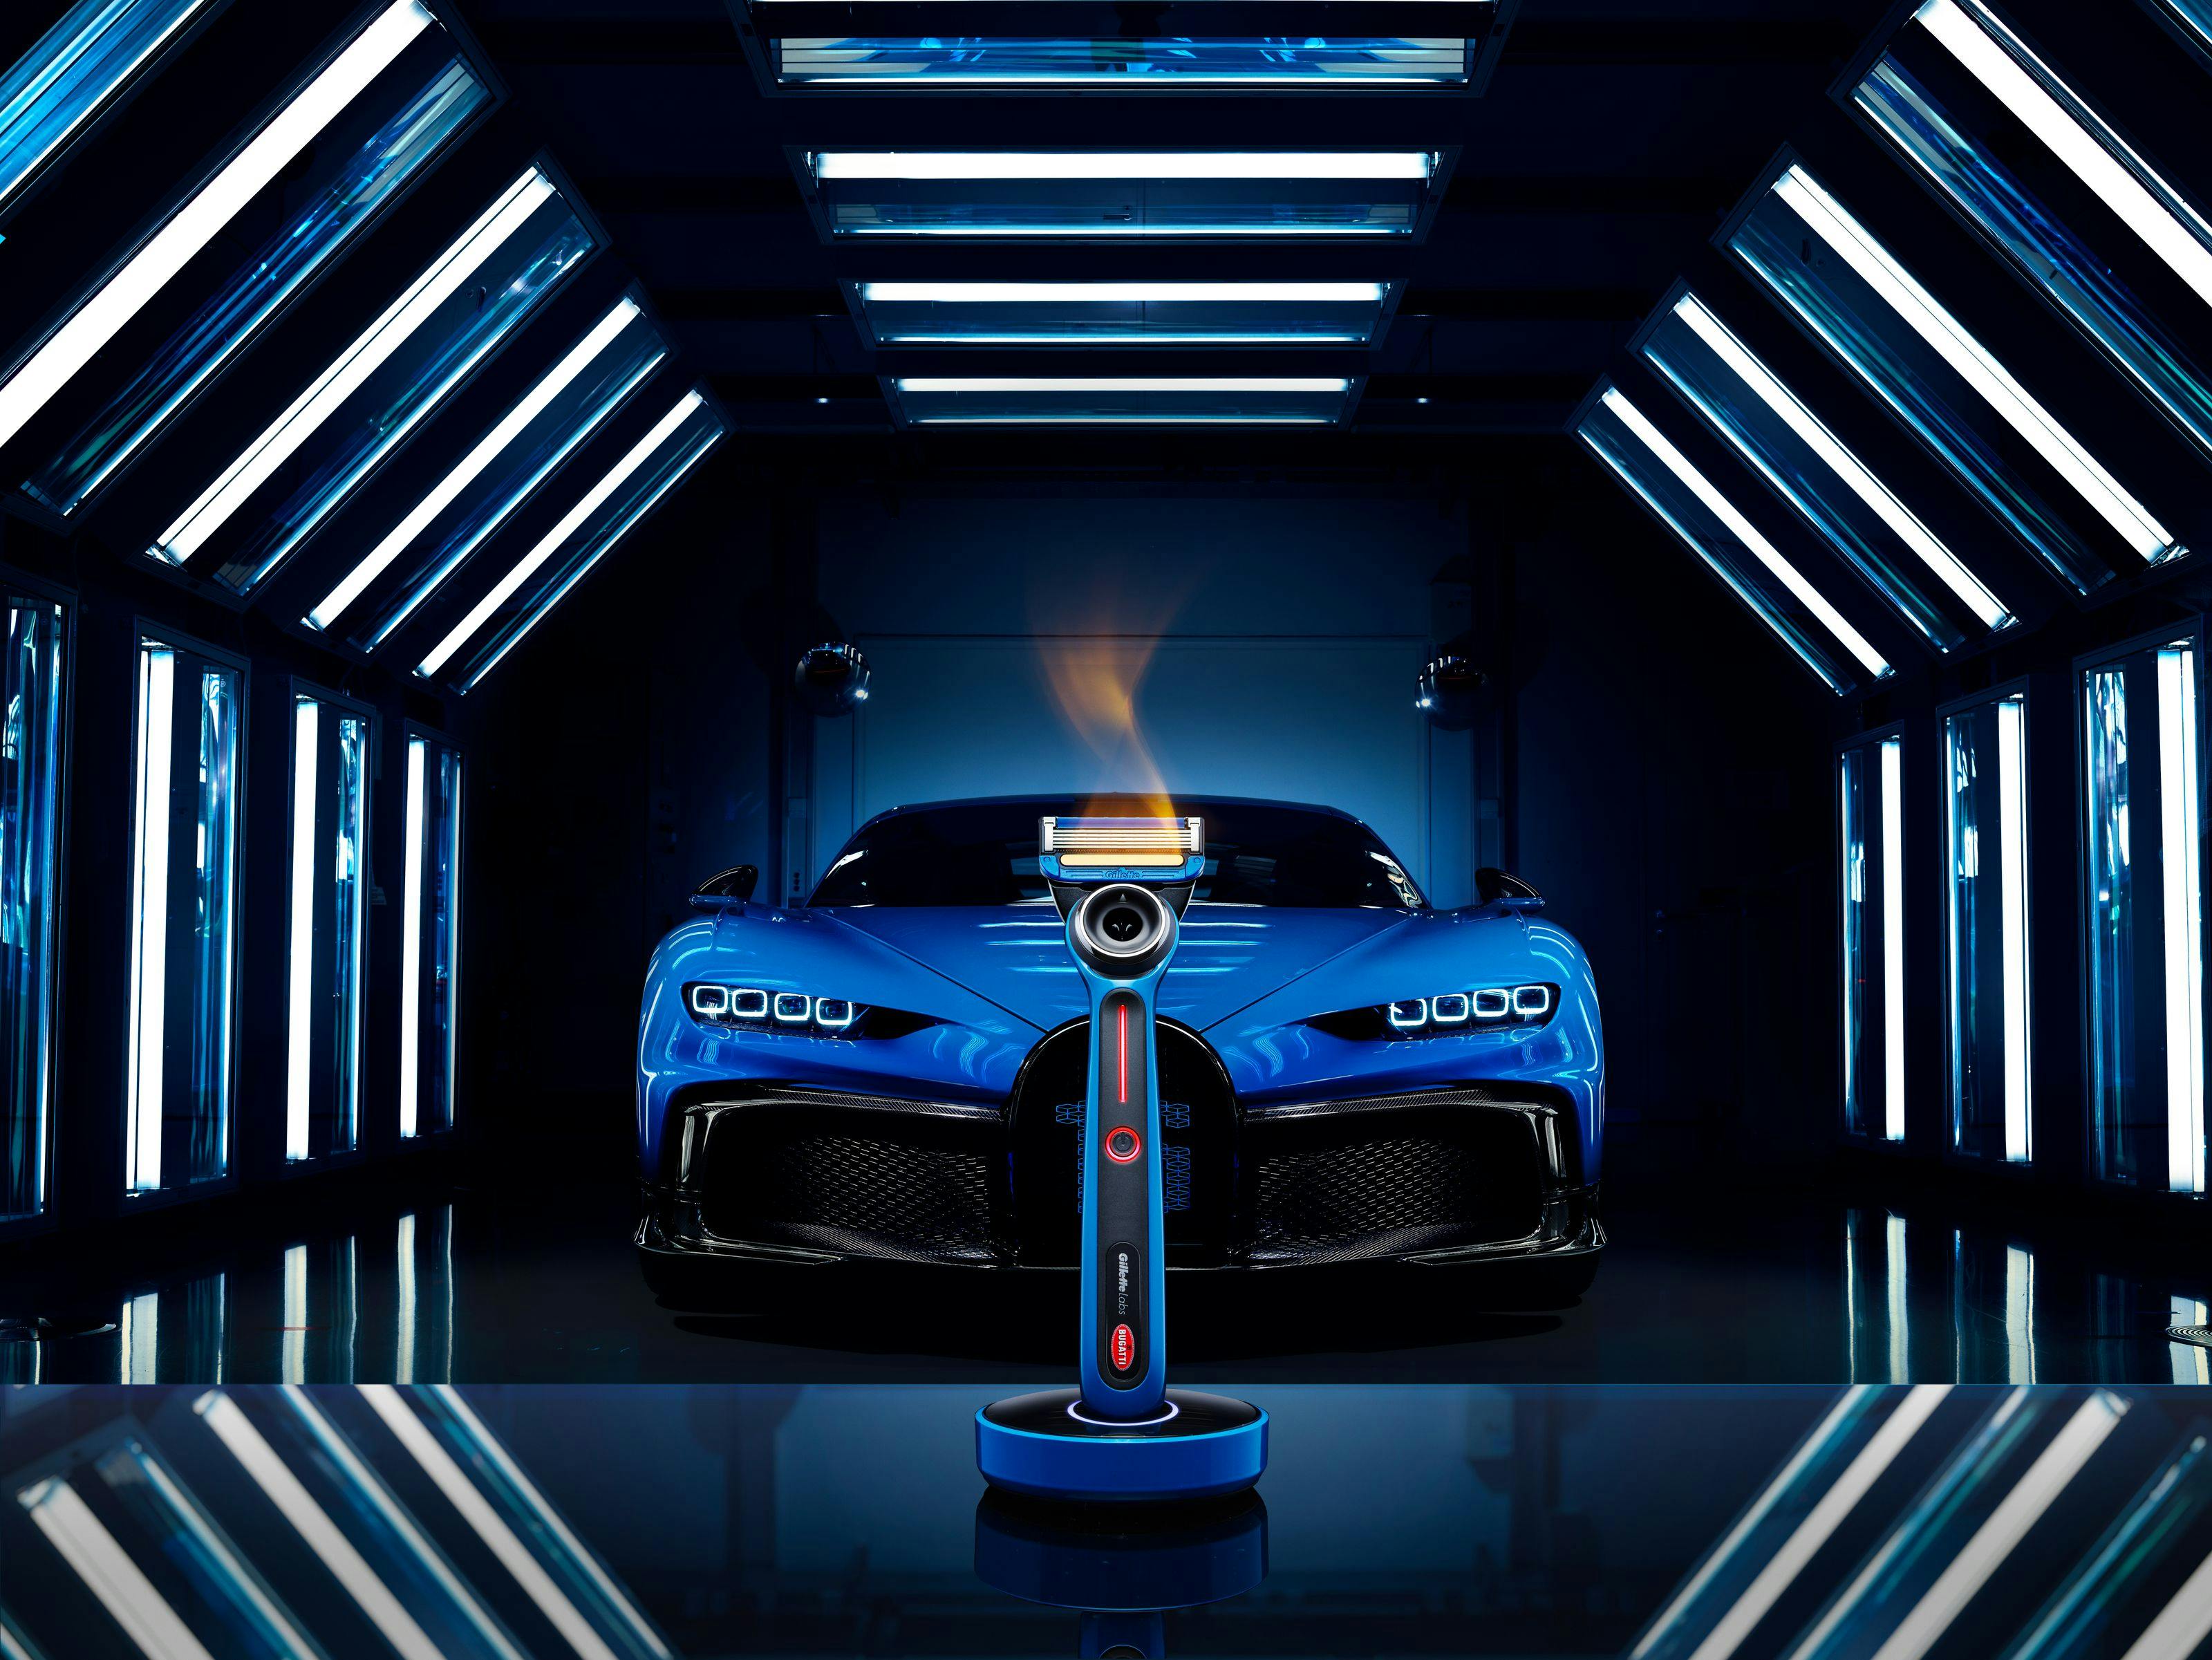 Bugatti partners with GilletteLabs to launch Special Edition Heated Razor